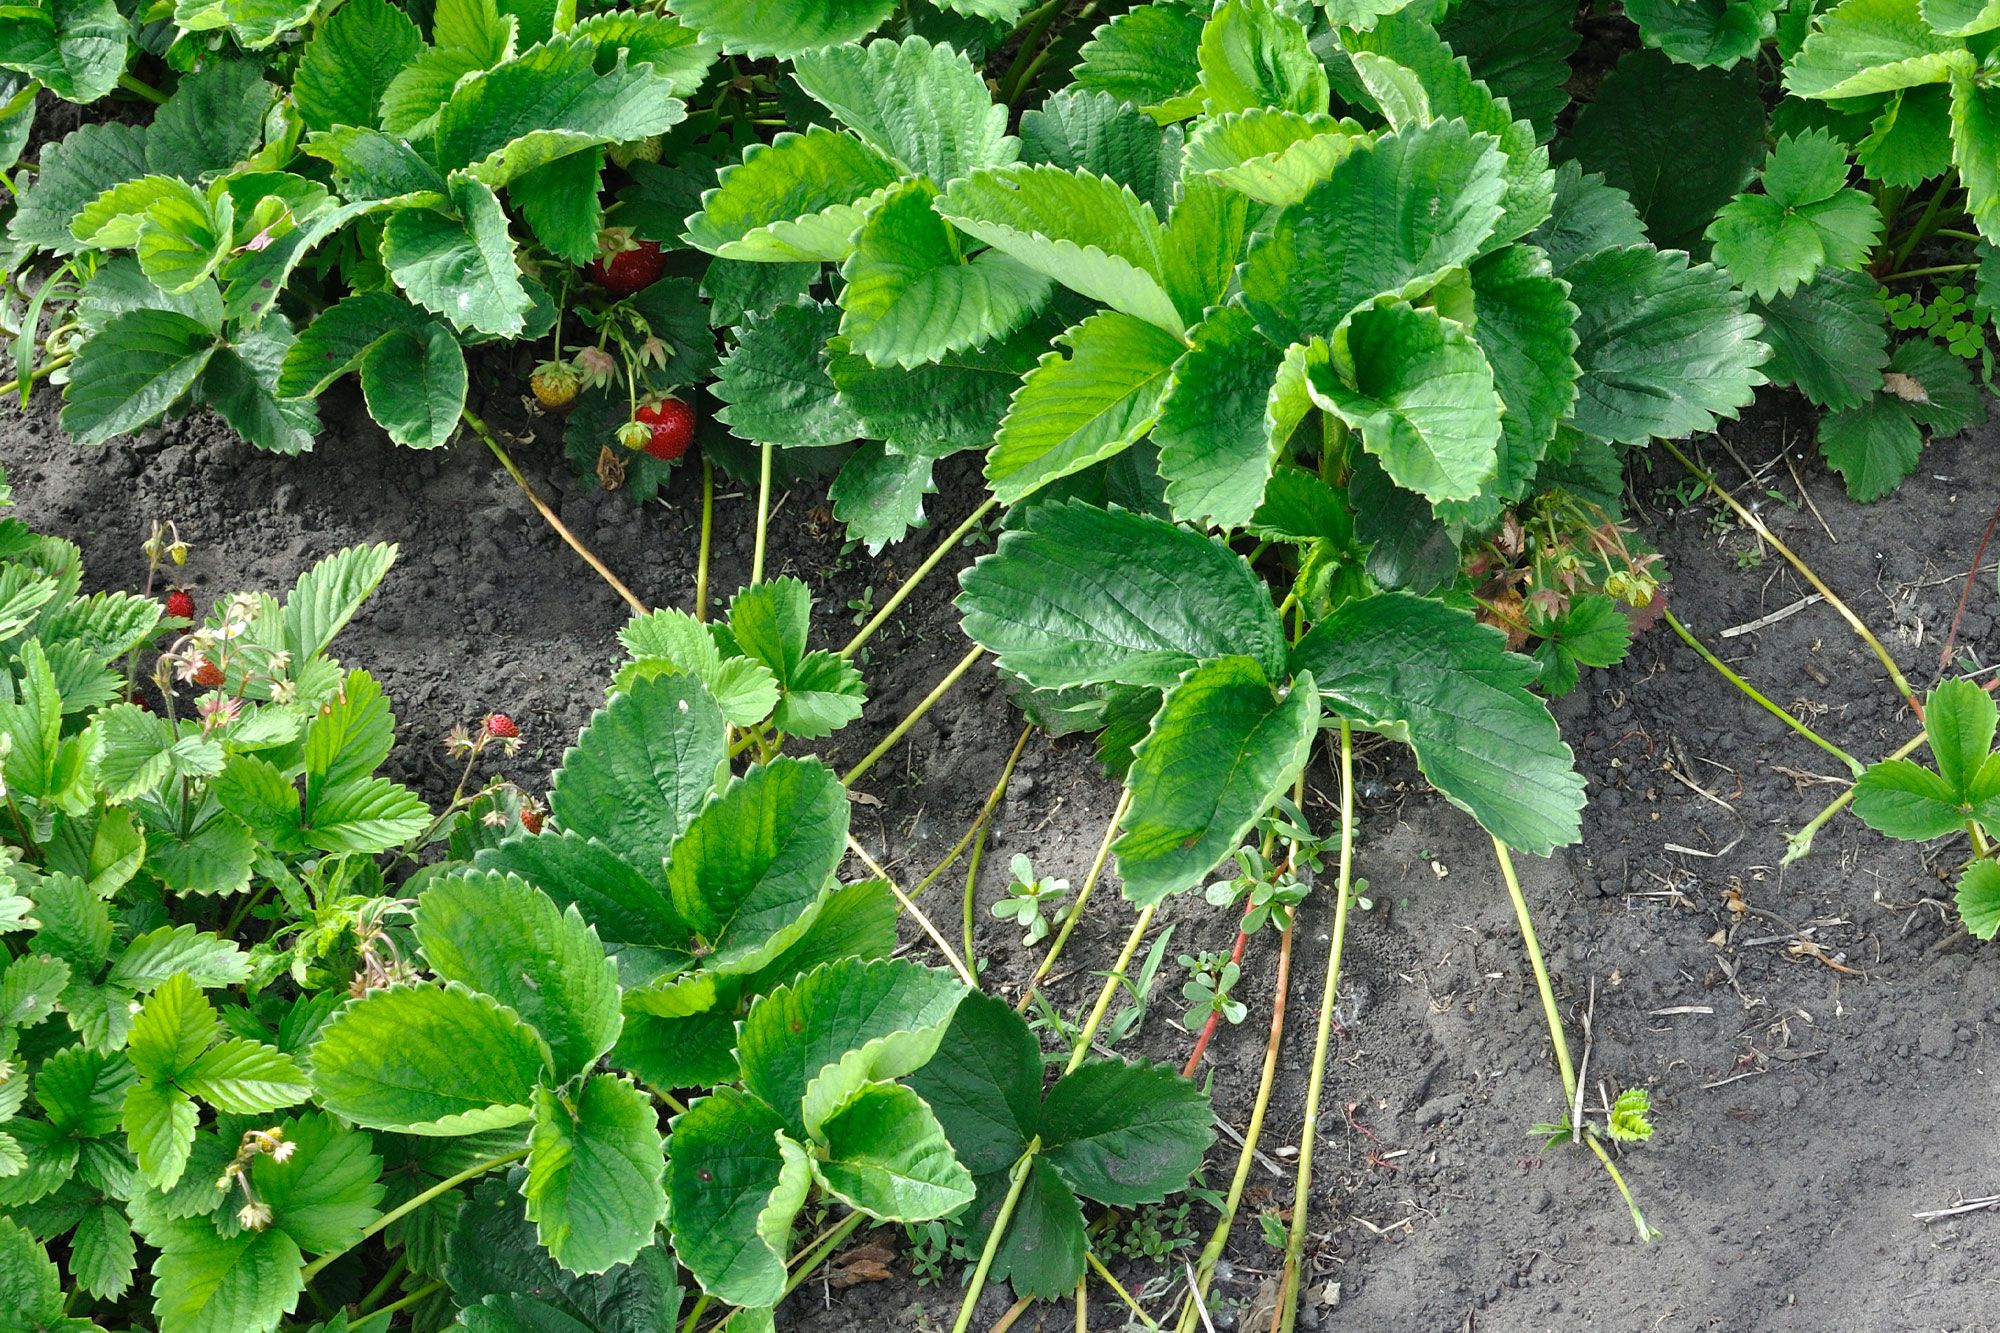 How to grow strawberries – from seed or runners